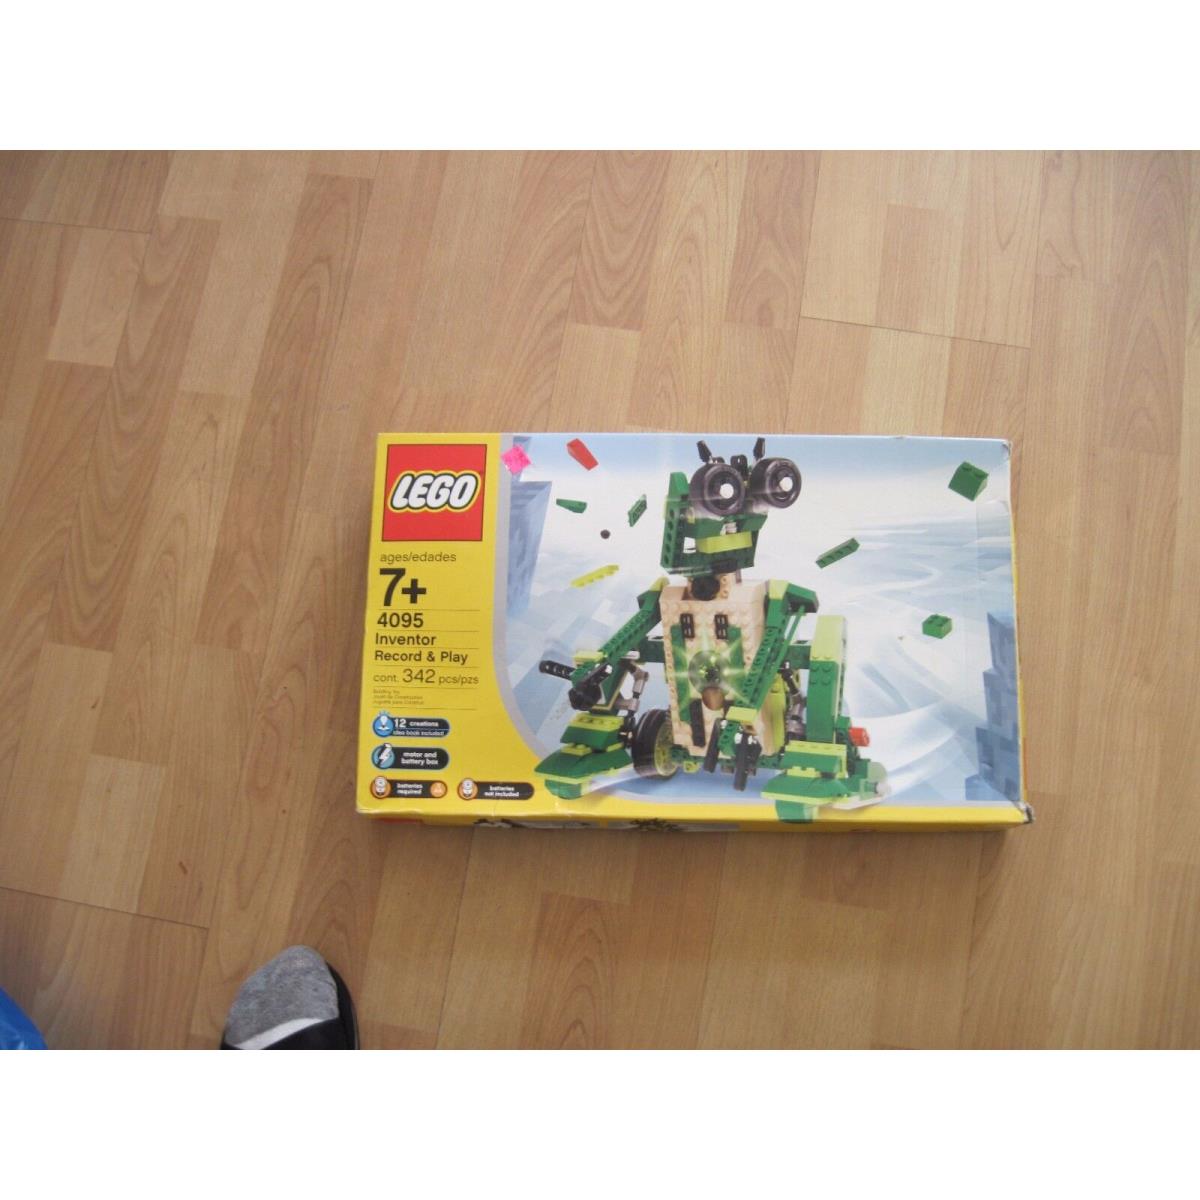 Lego Set 4095 Inventor Record and Play